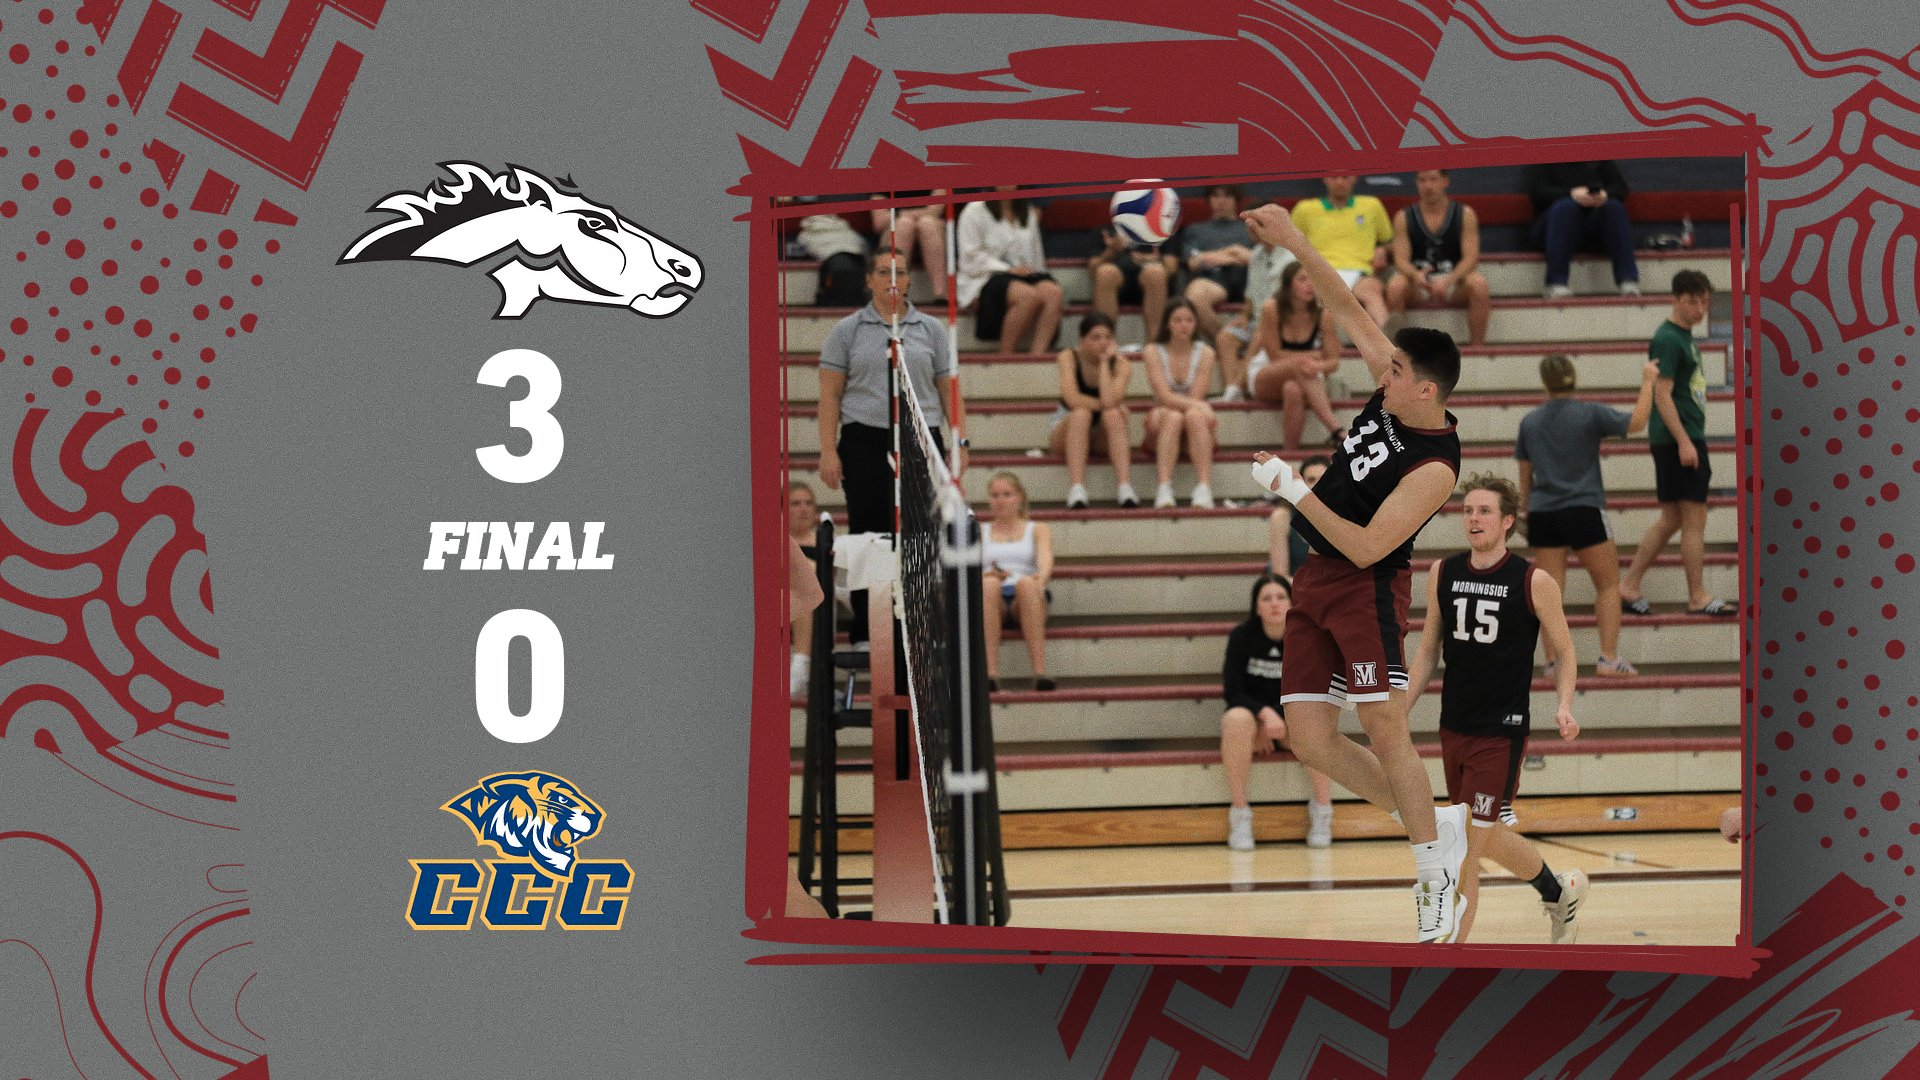 Mustangs advance to GPAC Semifinals with sweep of Central Christian